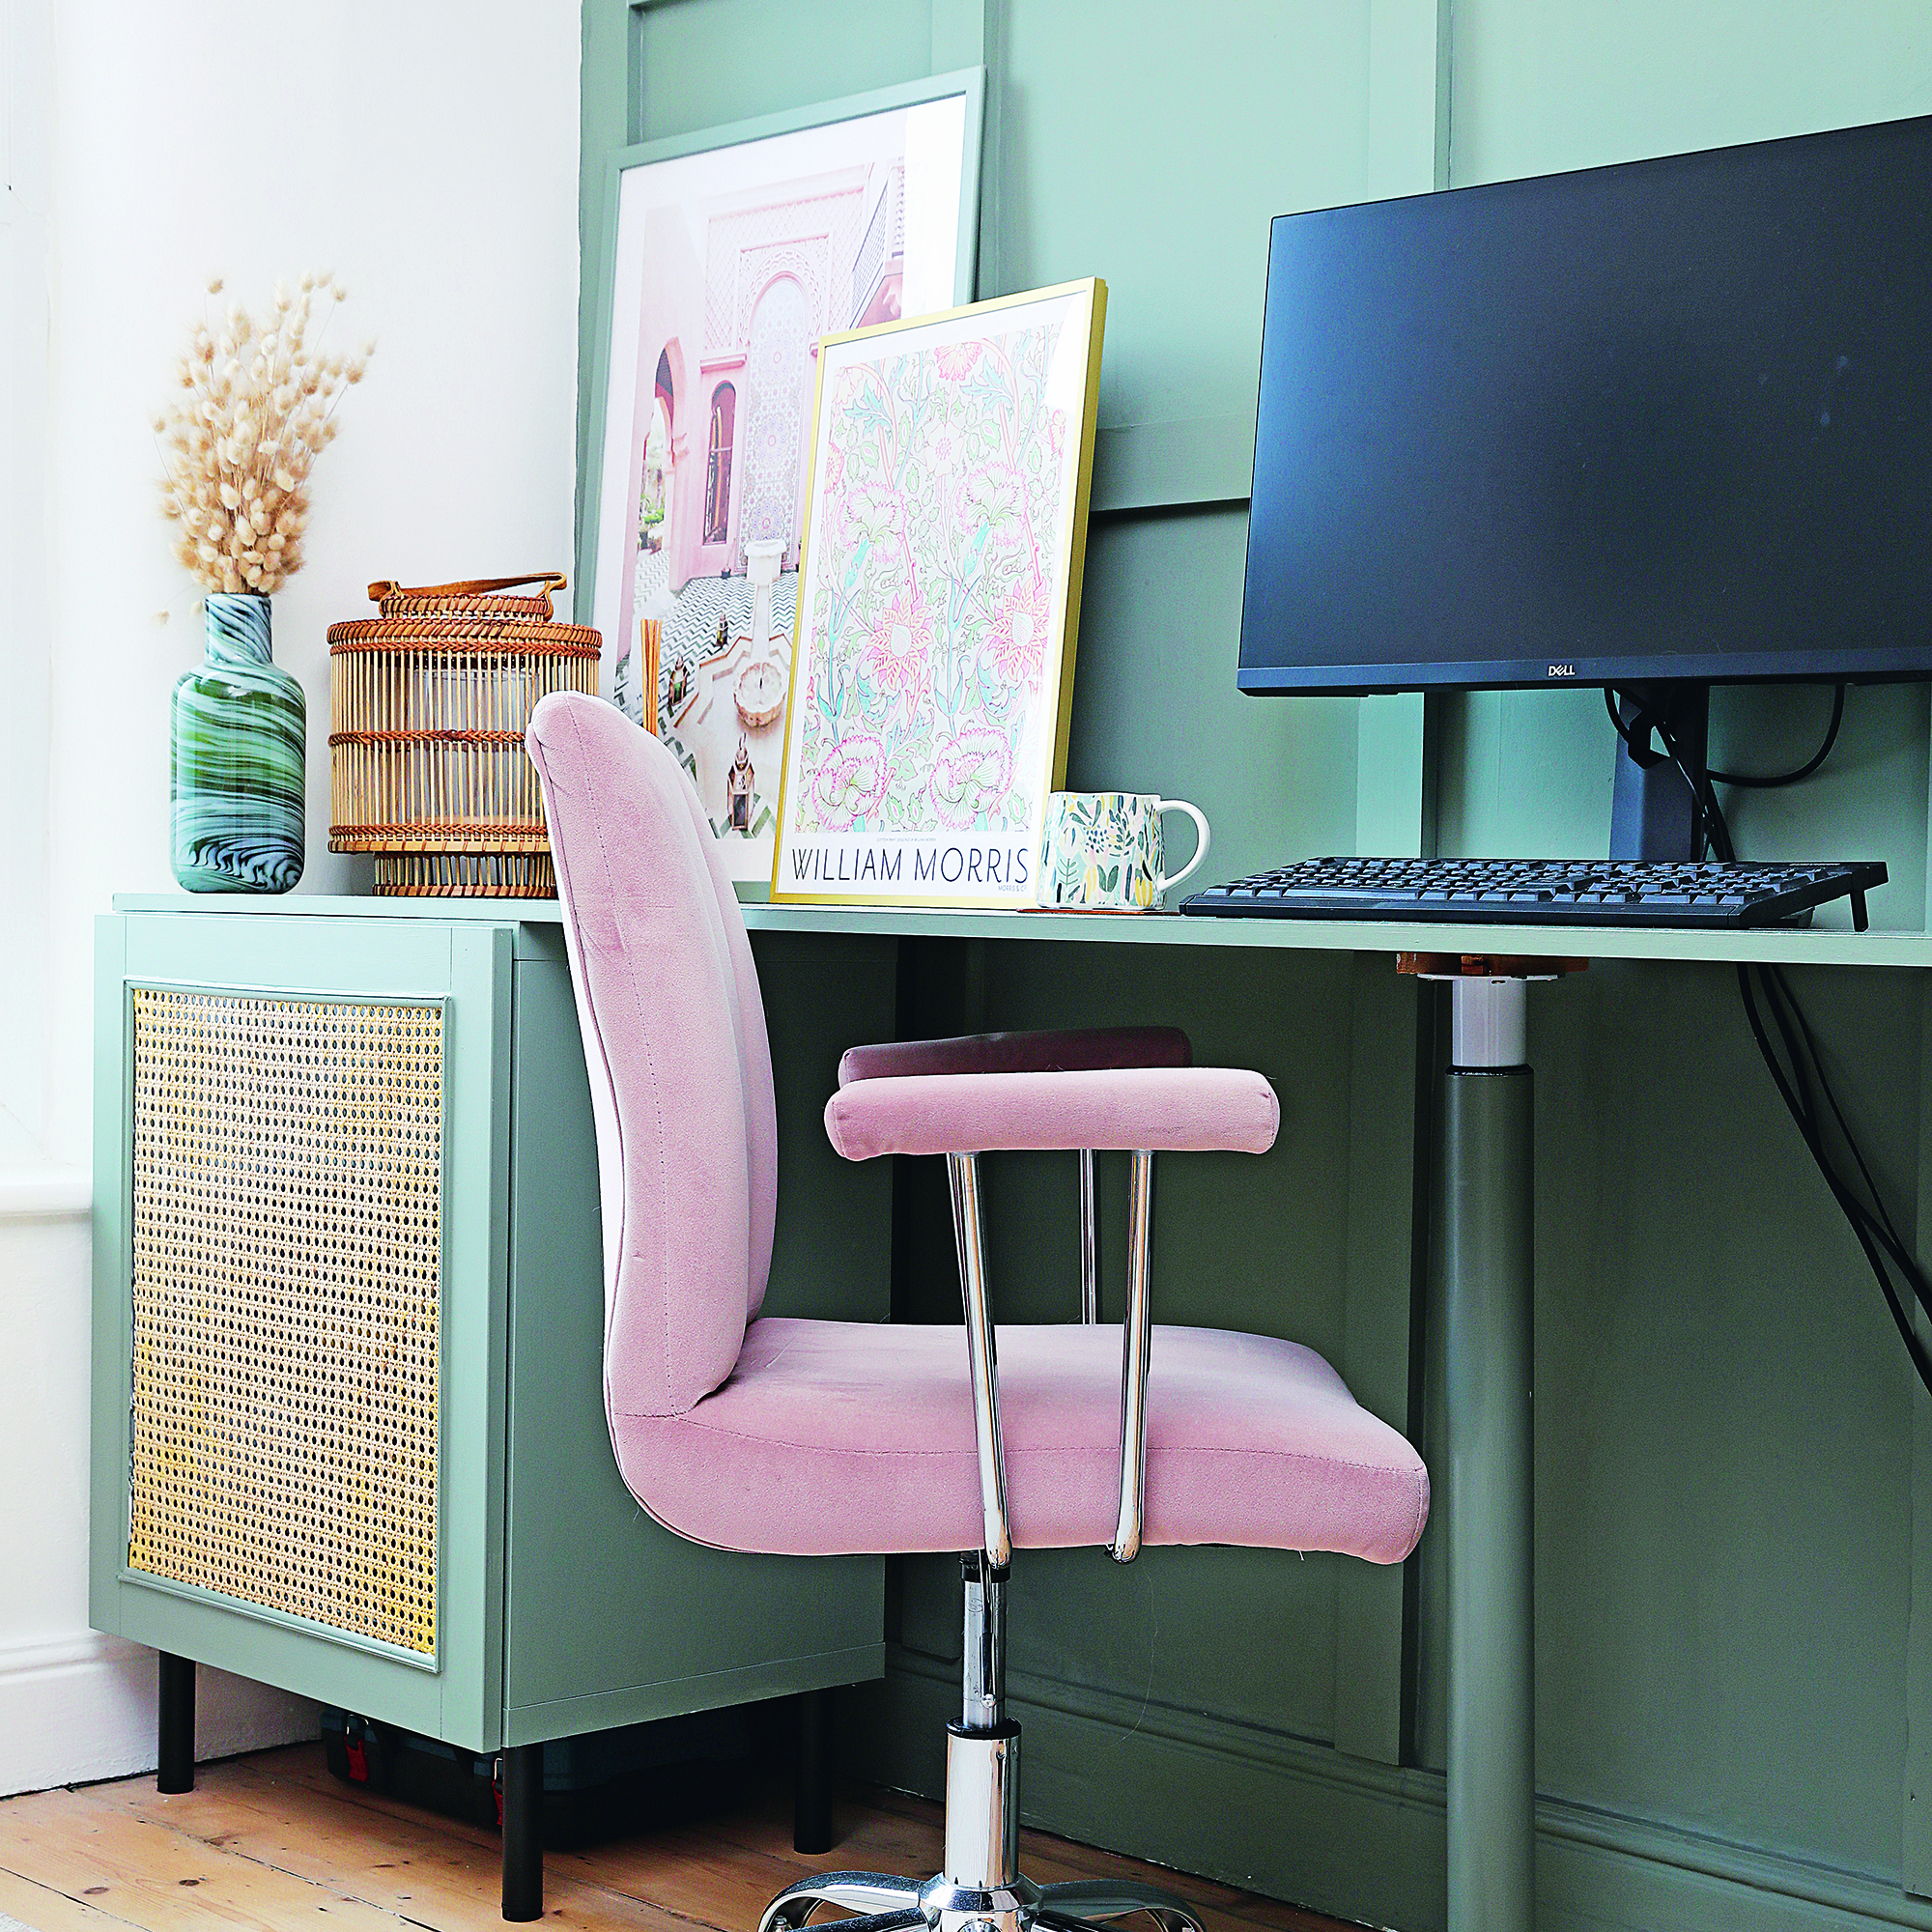 Home office with teal furniture, rattan cupboard and pink chair.